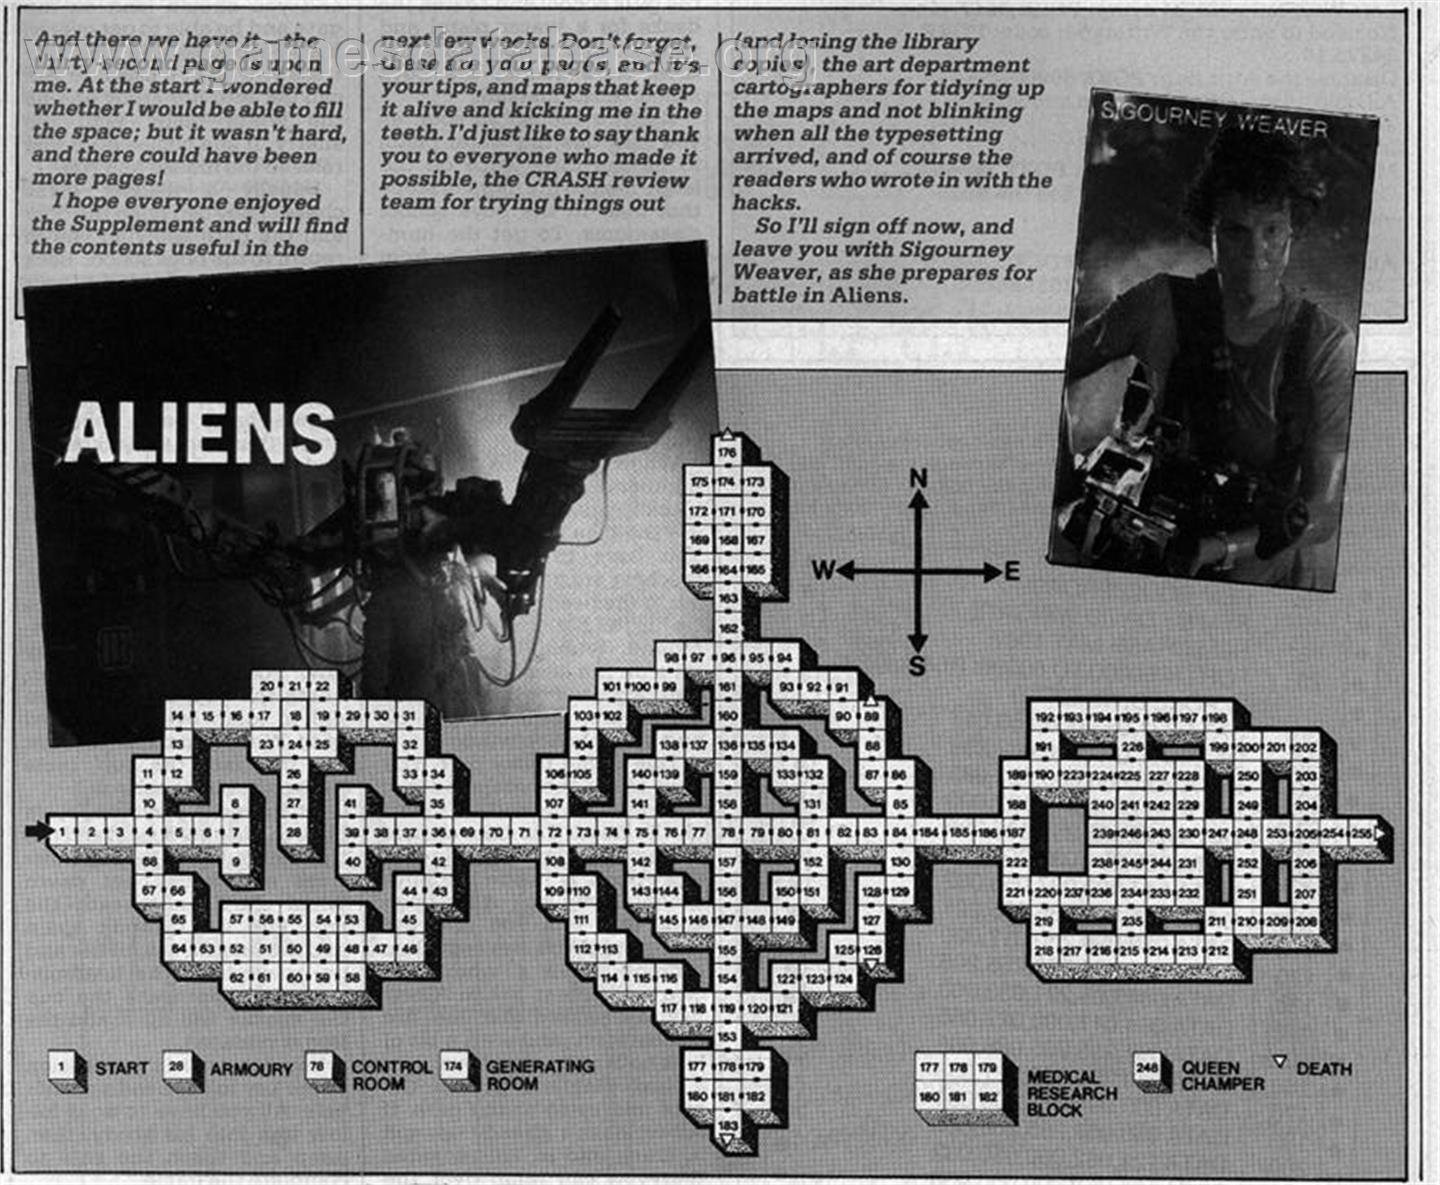 Aliens: The Computer Game - Commodore 64 - Artwork - Map